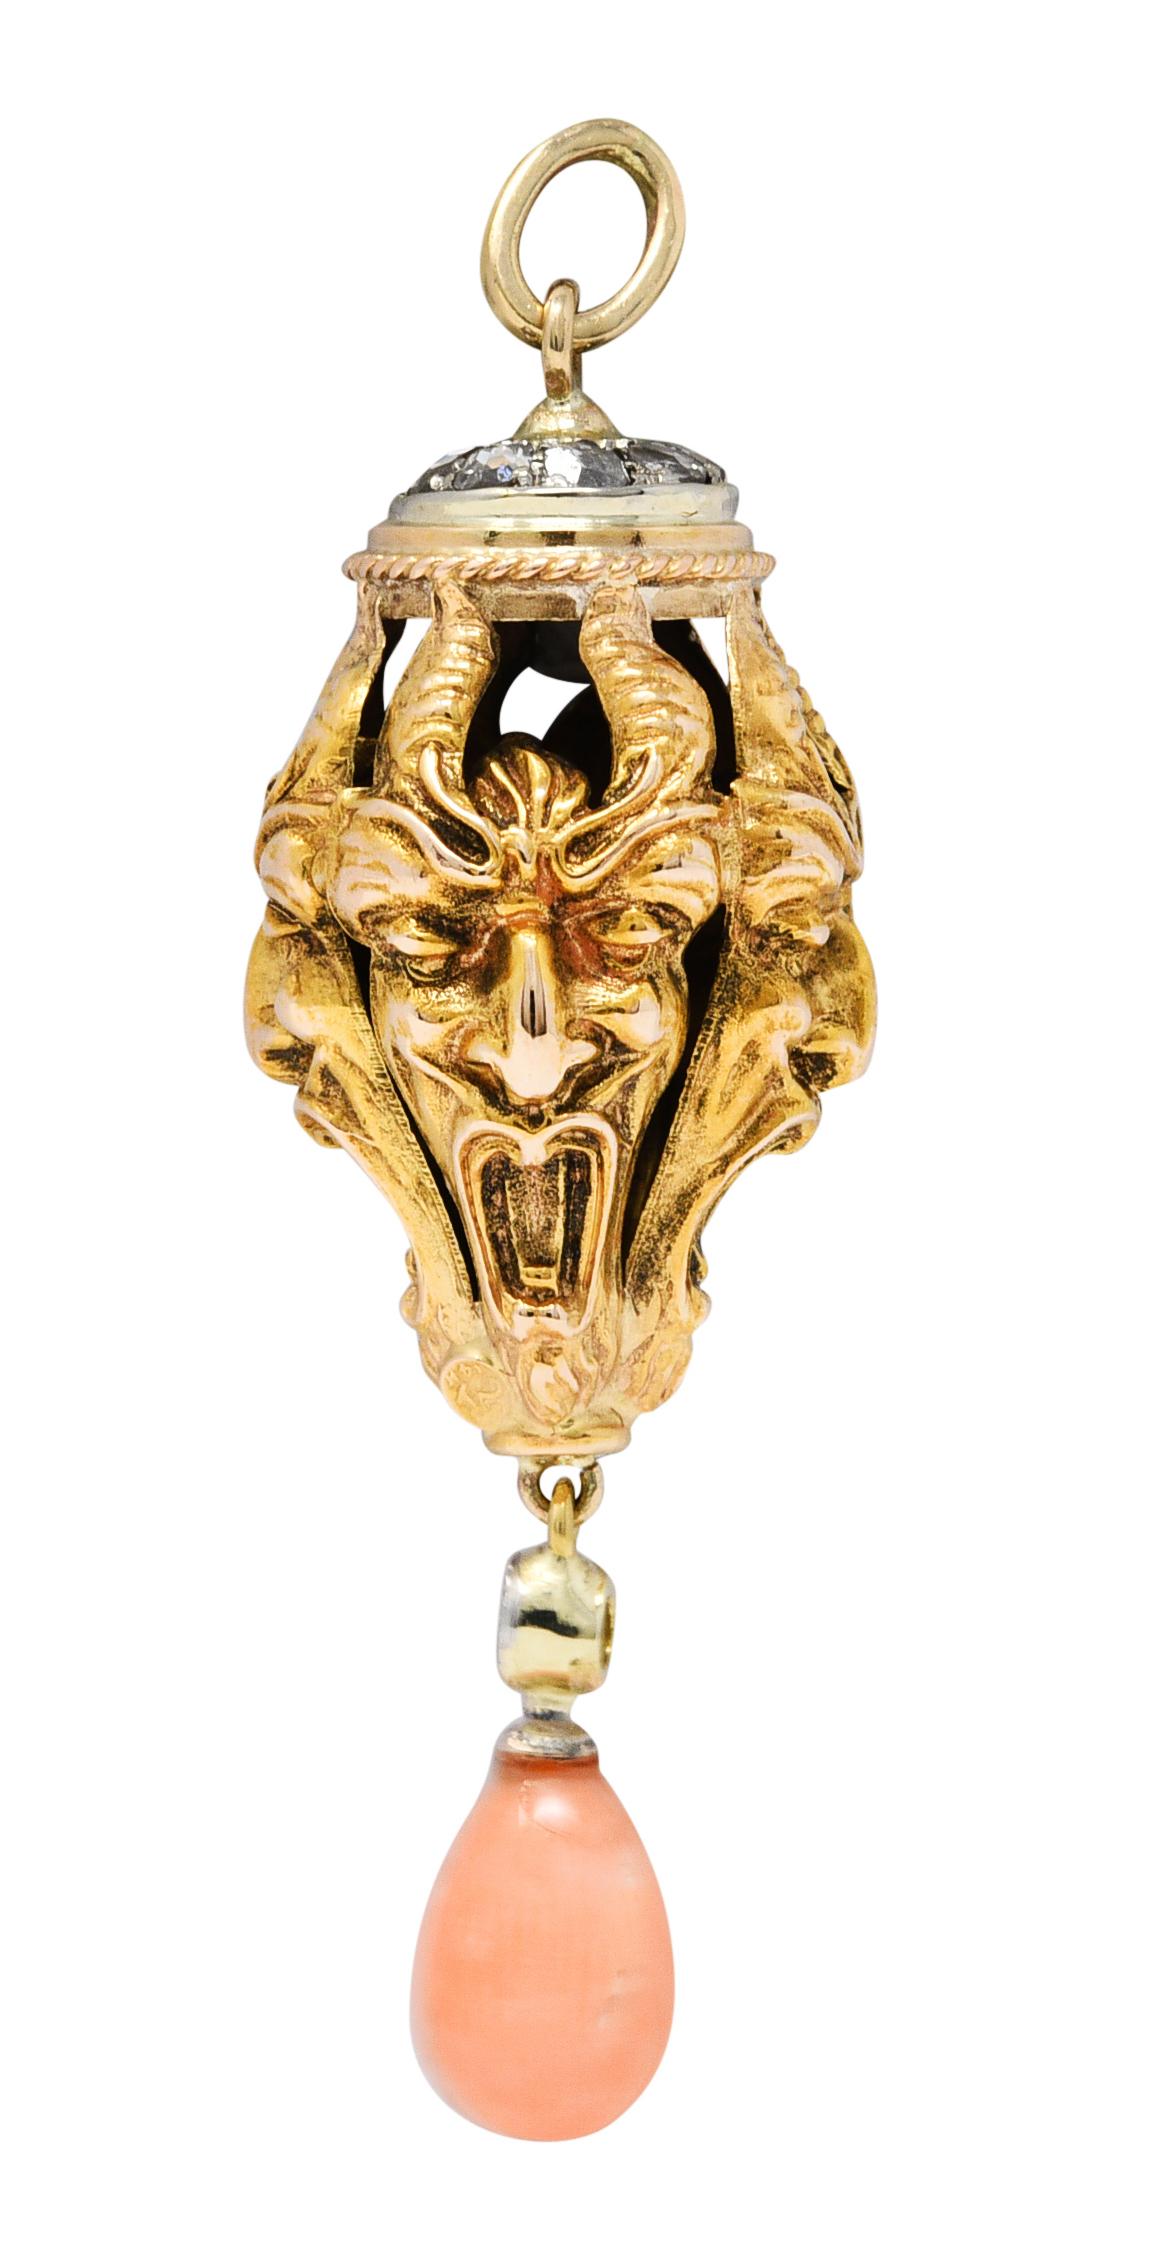 Pendant charm features a repeated devil motif as a pendulum form

Faces are horned and highly rendered and suspend an articulated coral drop

Opaque and pastel orangey pink in color with subtle mottling

With a round brilliant cut diamond weighing